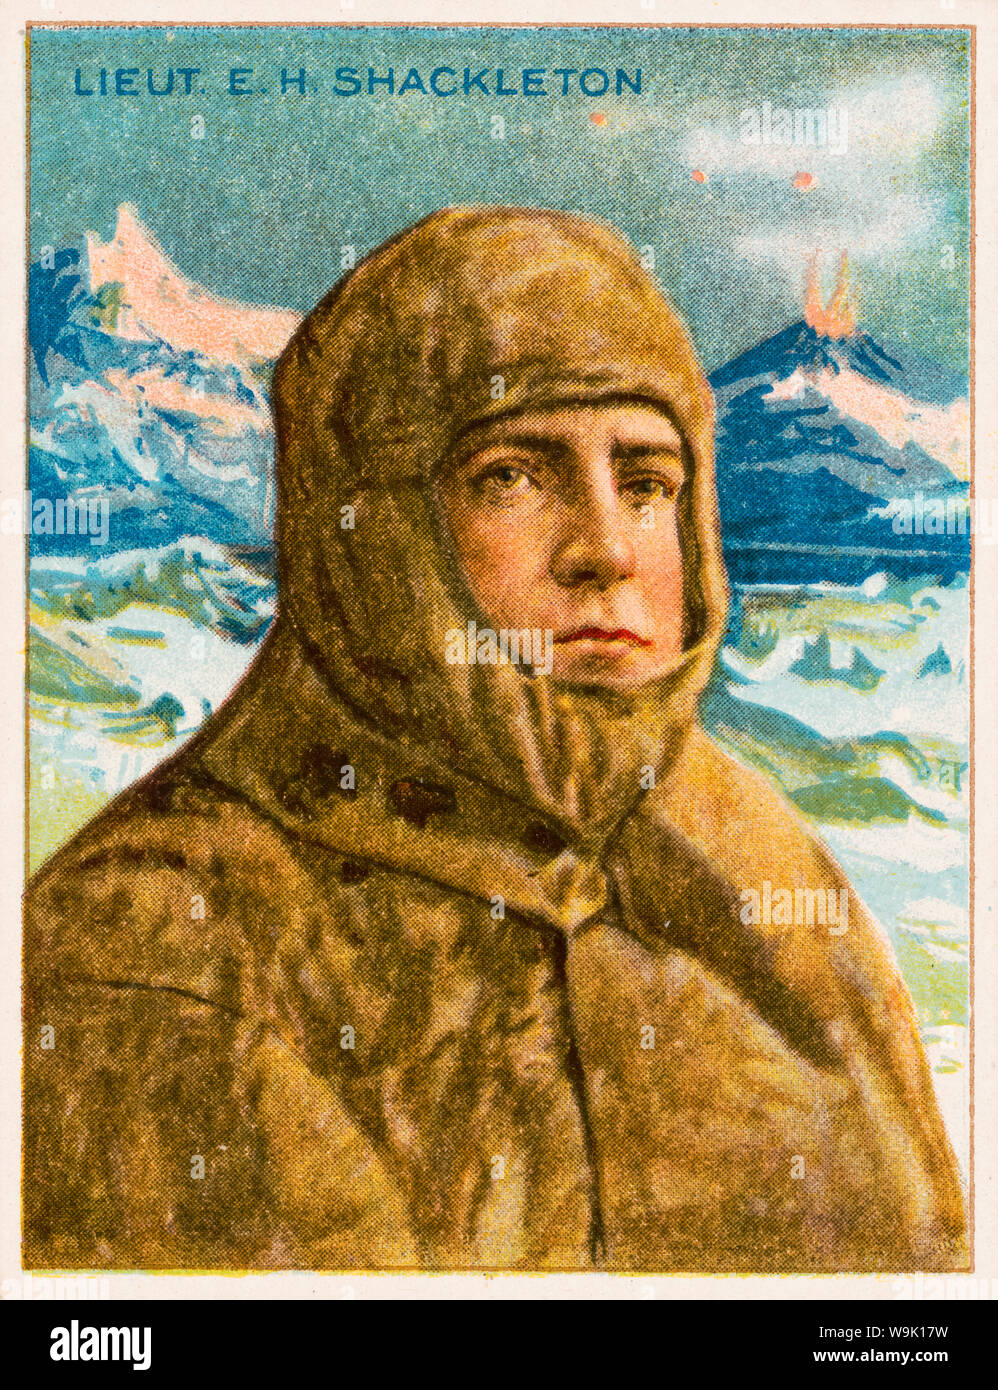 Ernest Henry Shackleton, (1874-1922), portrait drawing on a Cigarette Card, 1910 American Tobacco Company, World's Greatest Explorers series Stock Photo